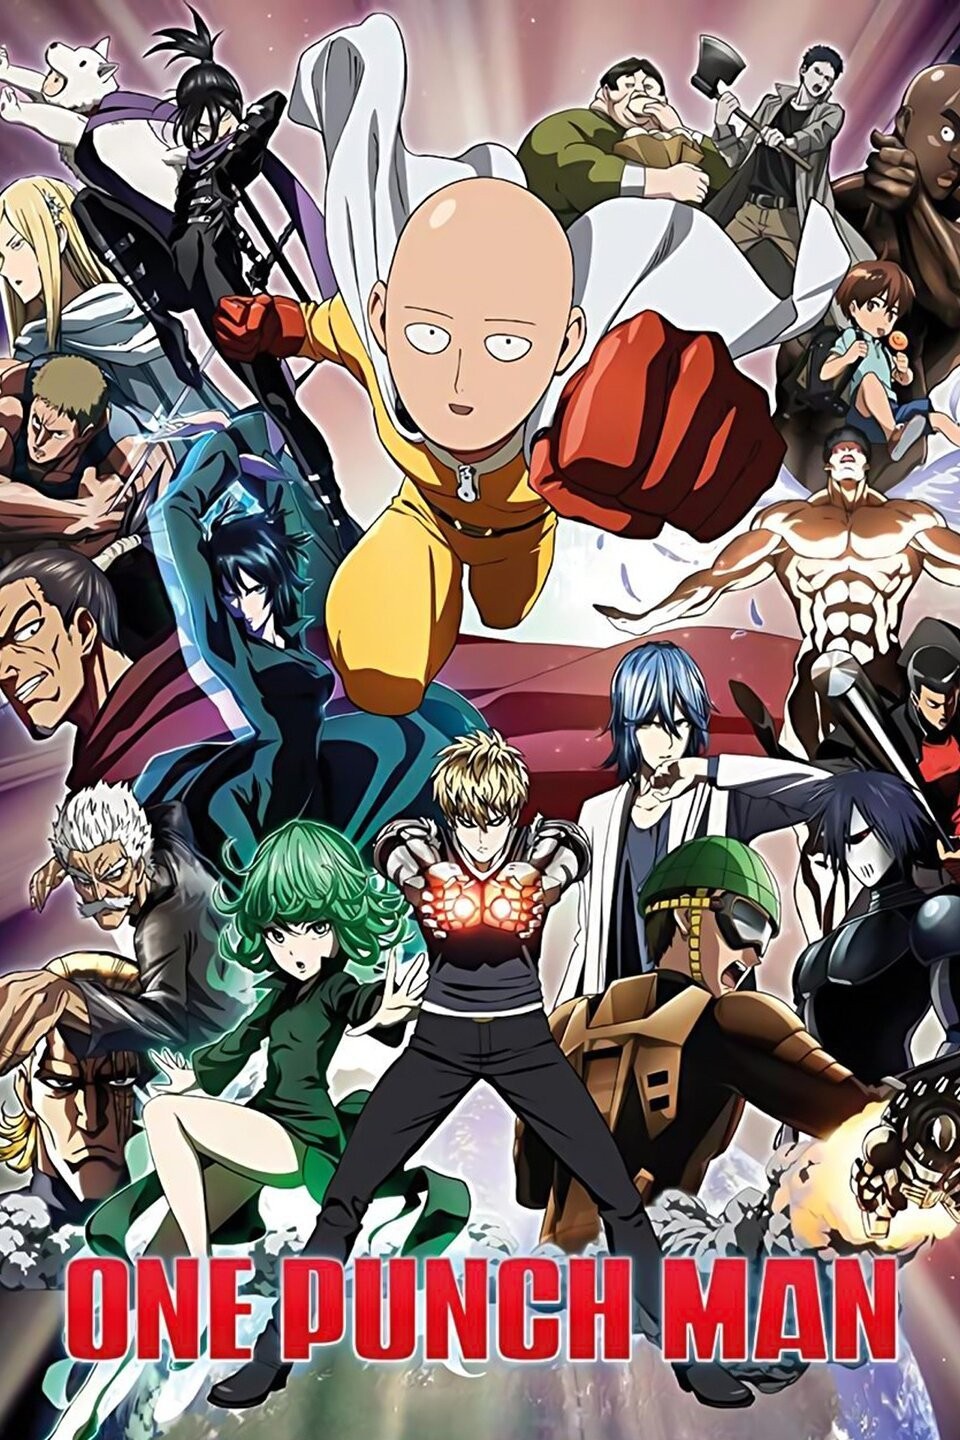 One Punch Man Season 2 starts 4/9 streaming exclusively on Hulu : r/anime